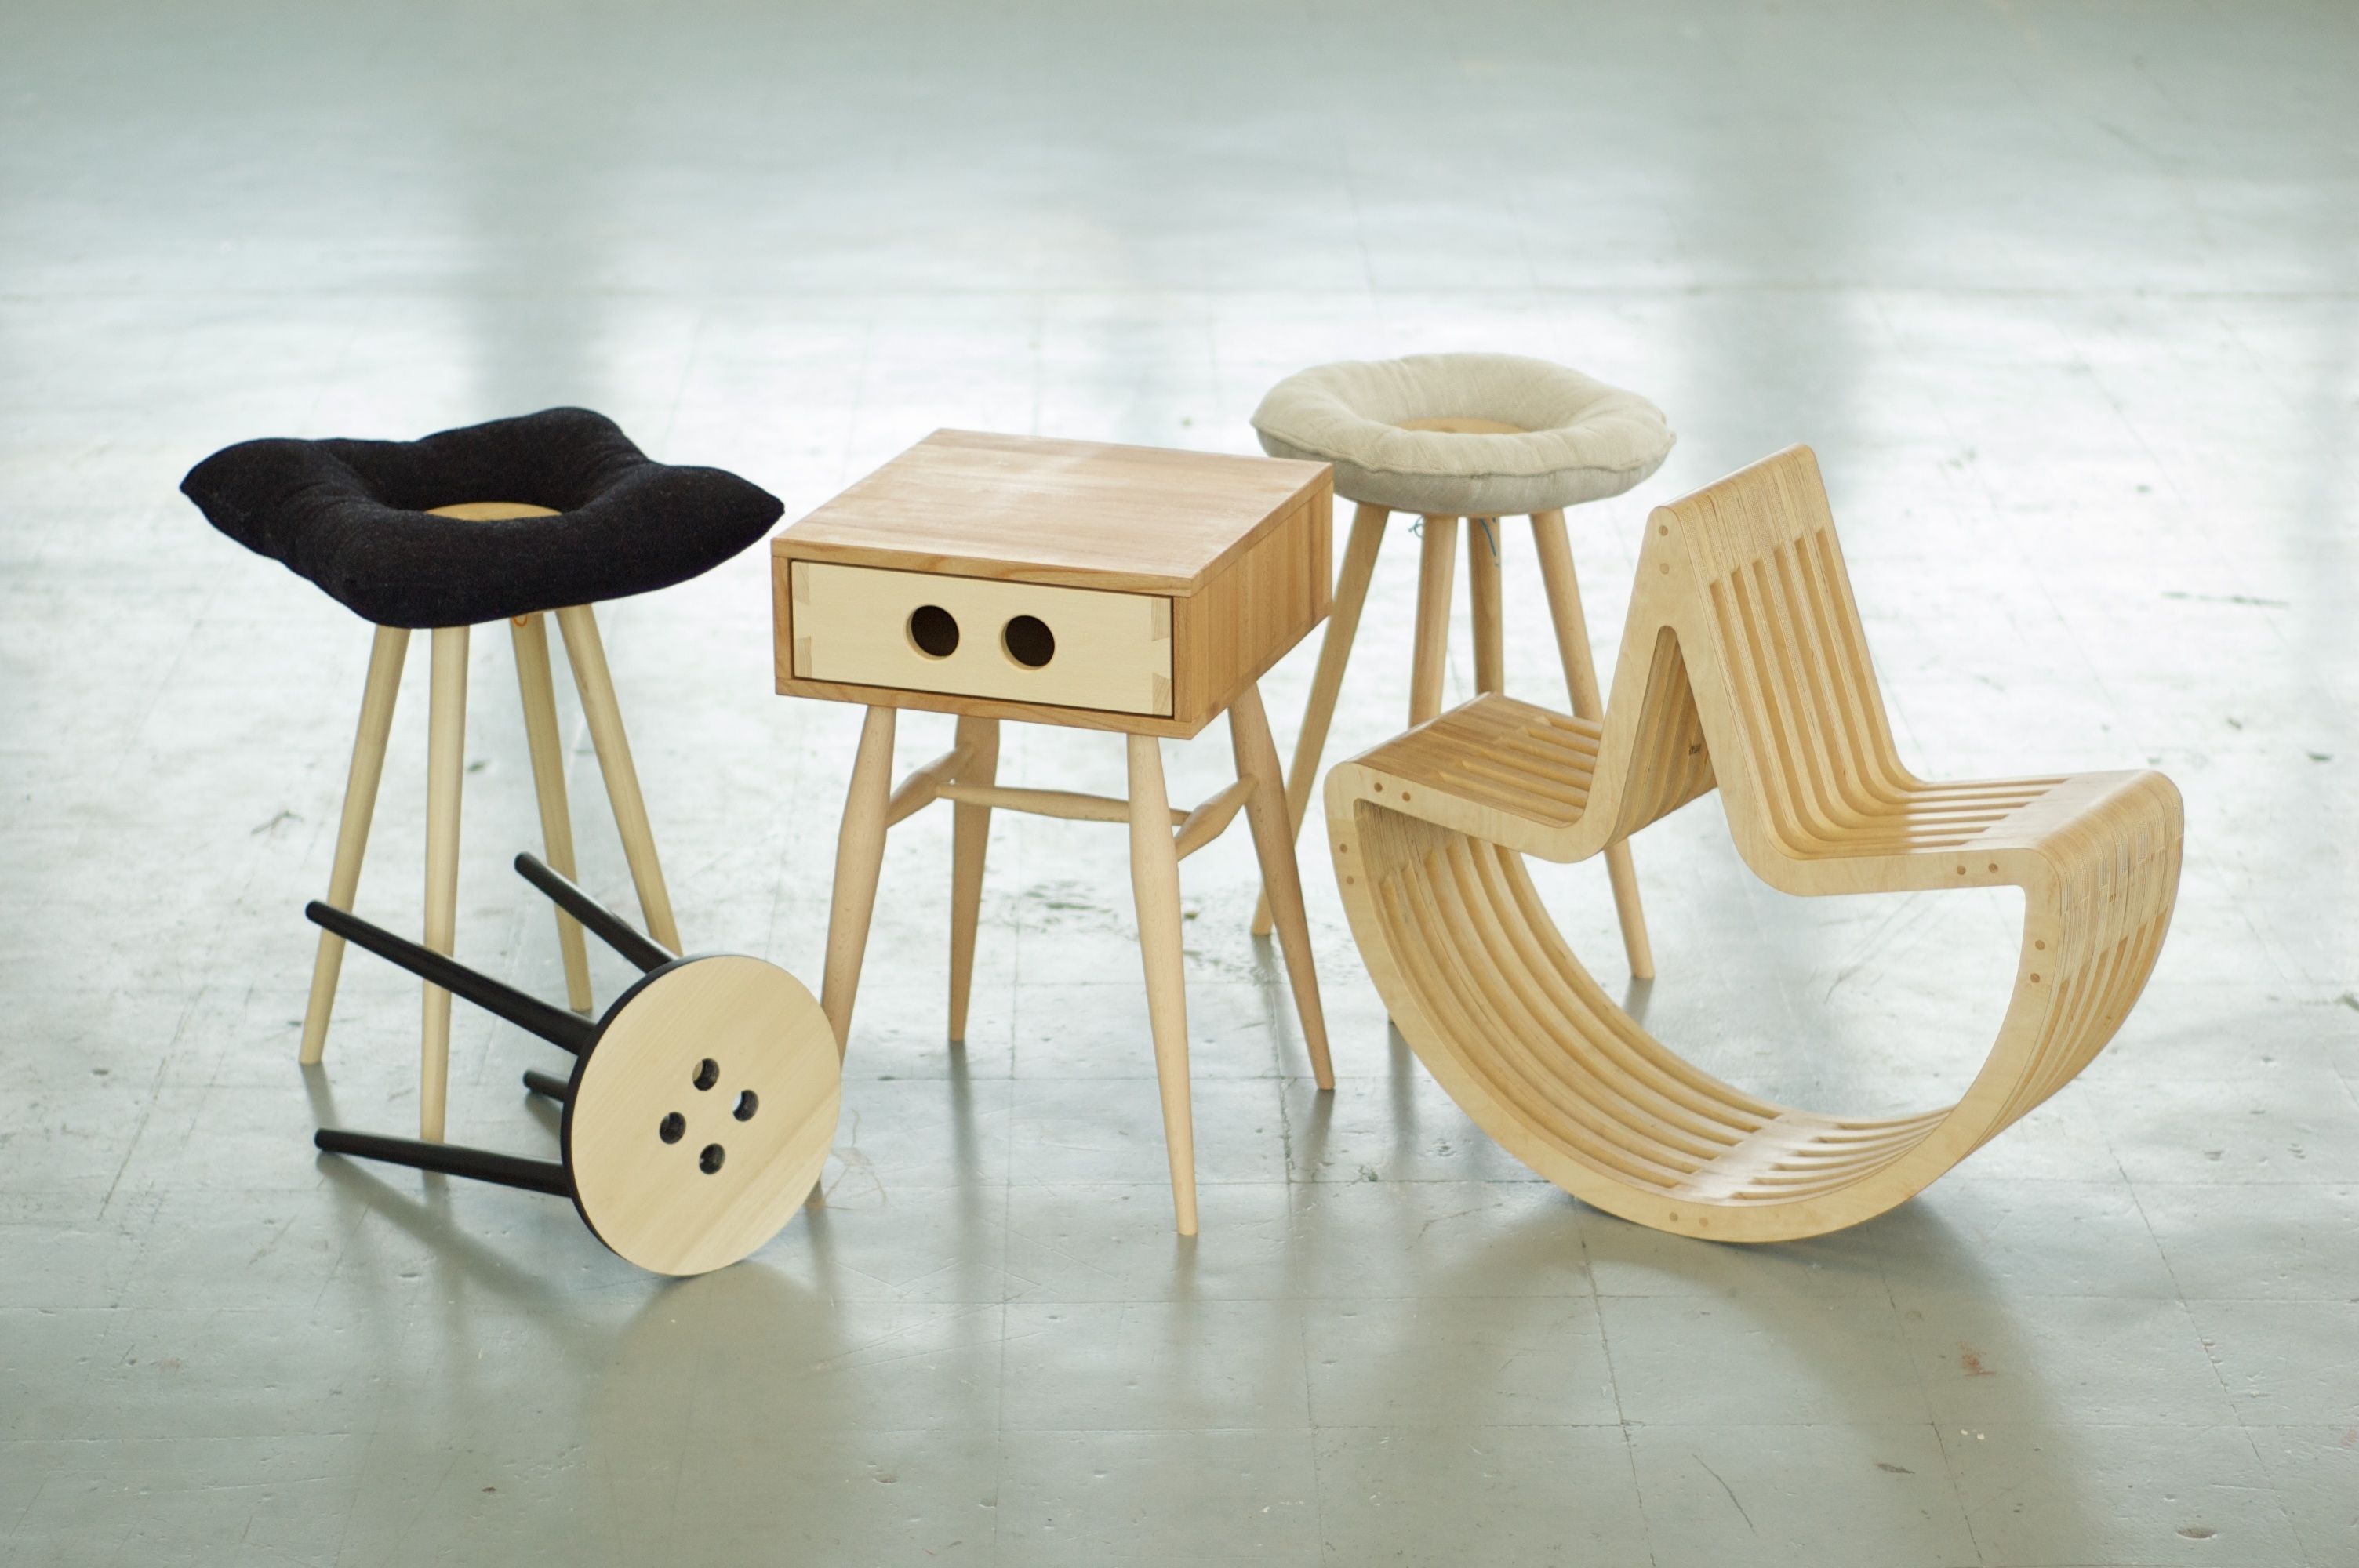 Bedroom stools made out of wood